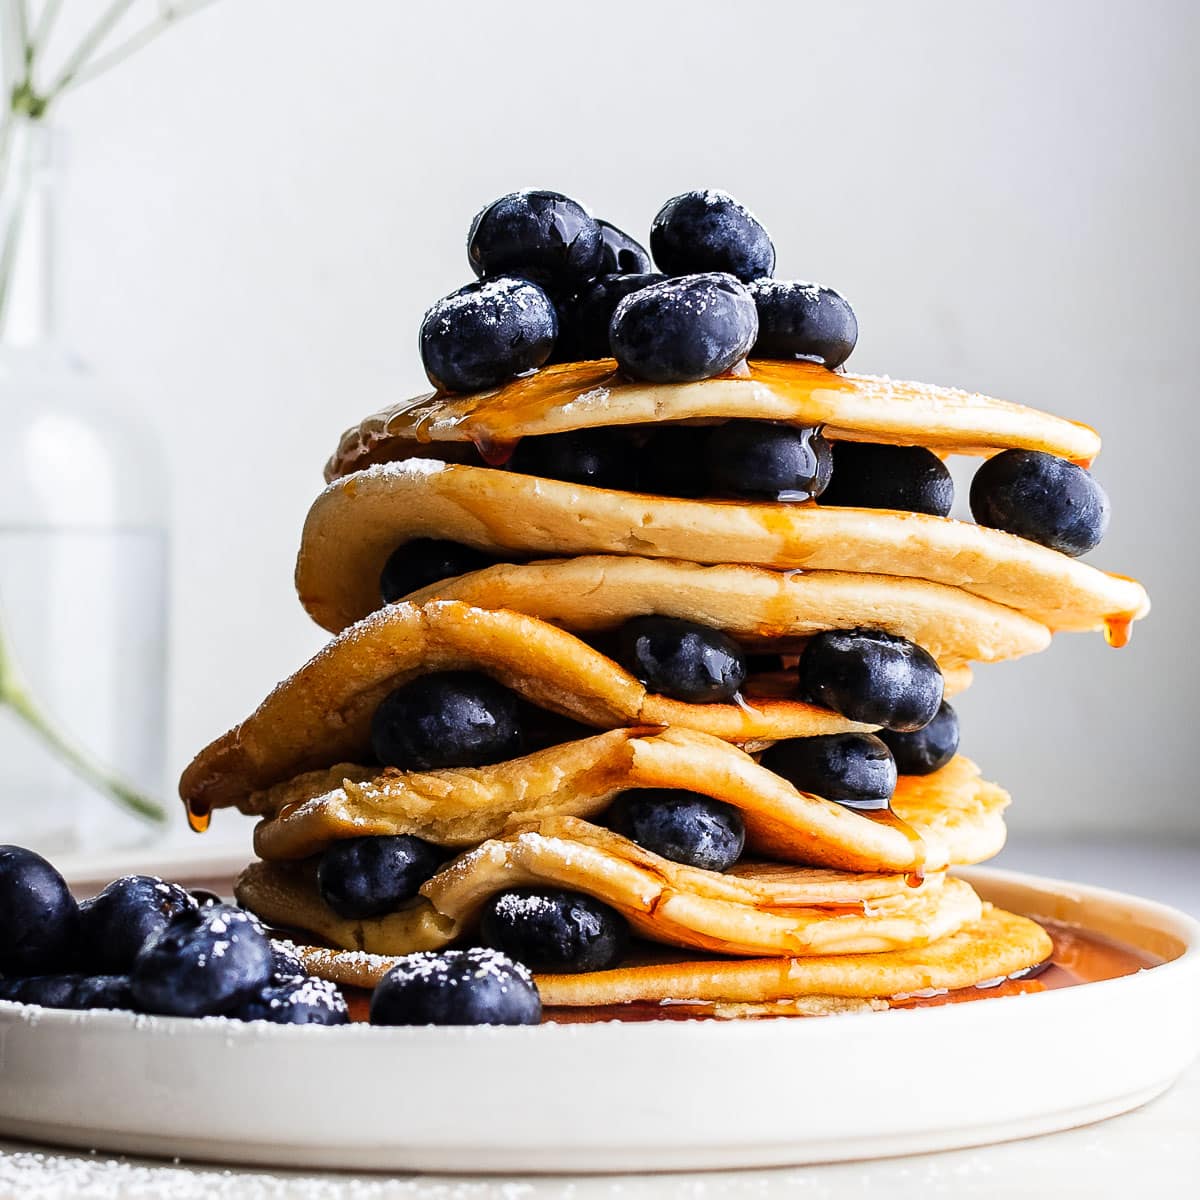 Stack of einkorn pancakes garnished with blueberries and drizzled with maple syrup on white plate.